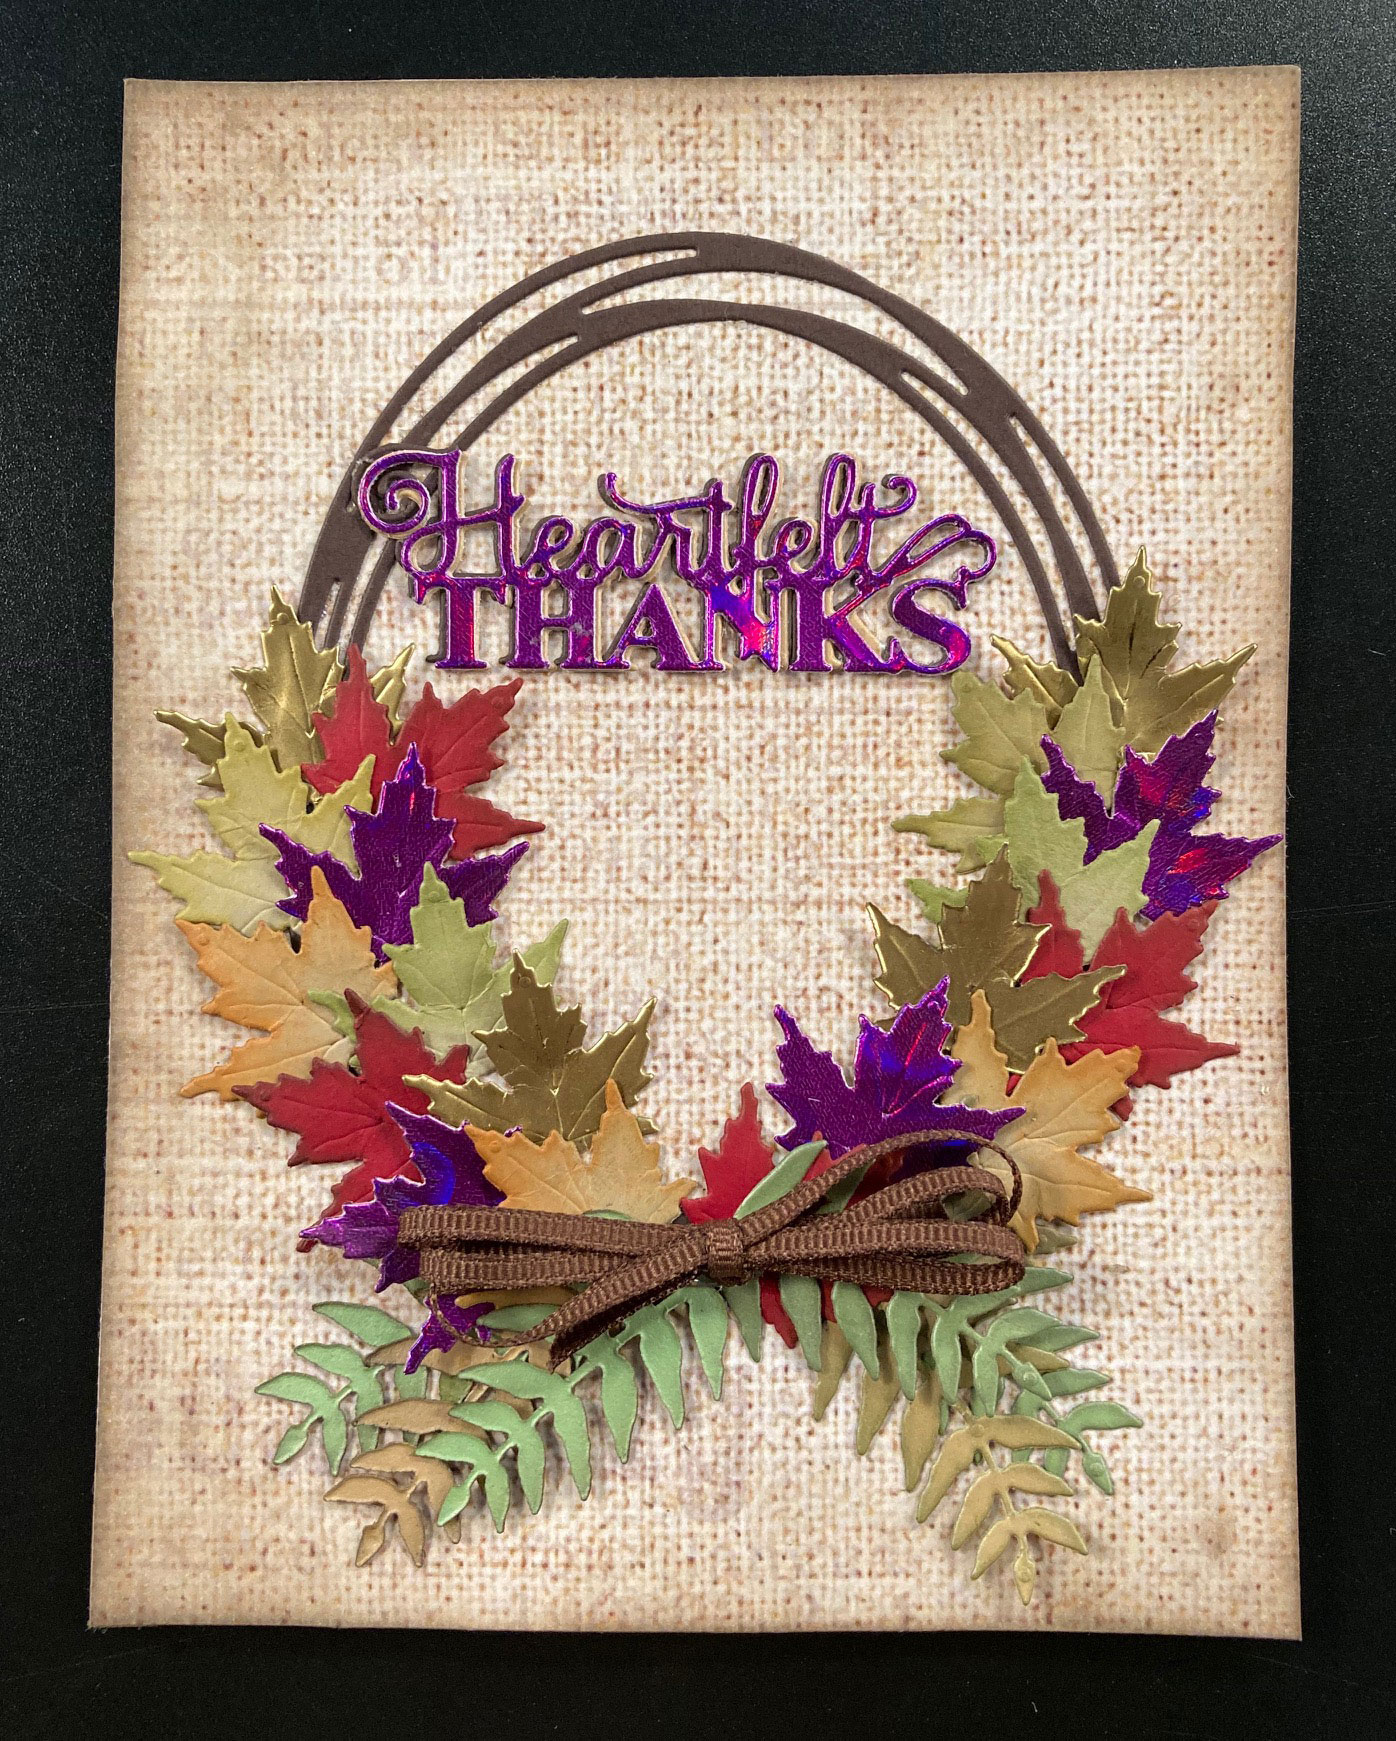 Paper Wishes  Heartfelt Thanks Fall Wreath Card